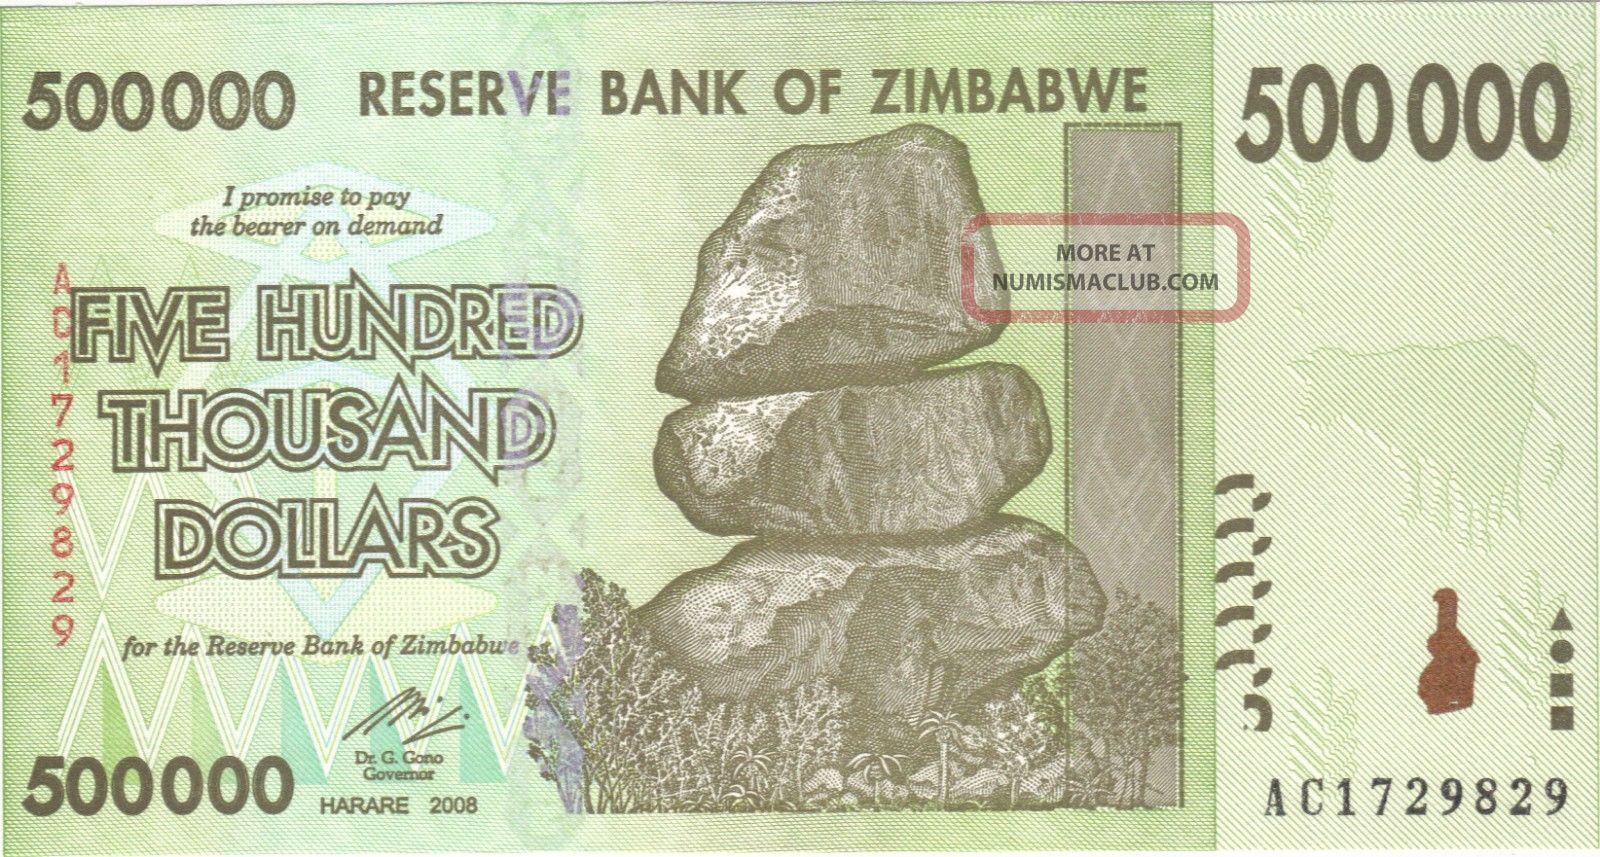 2008 500 000 Dollars Zimbabwe Currency Unc Banknote Note Money Bill Cash Africa